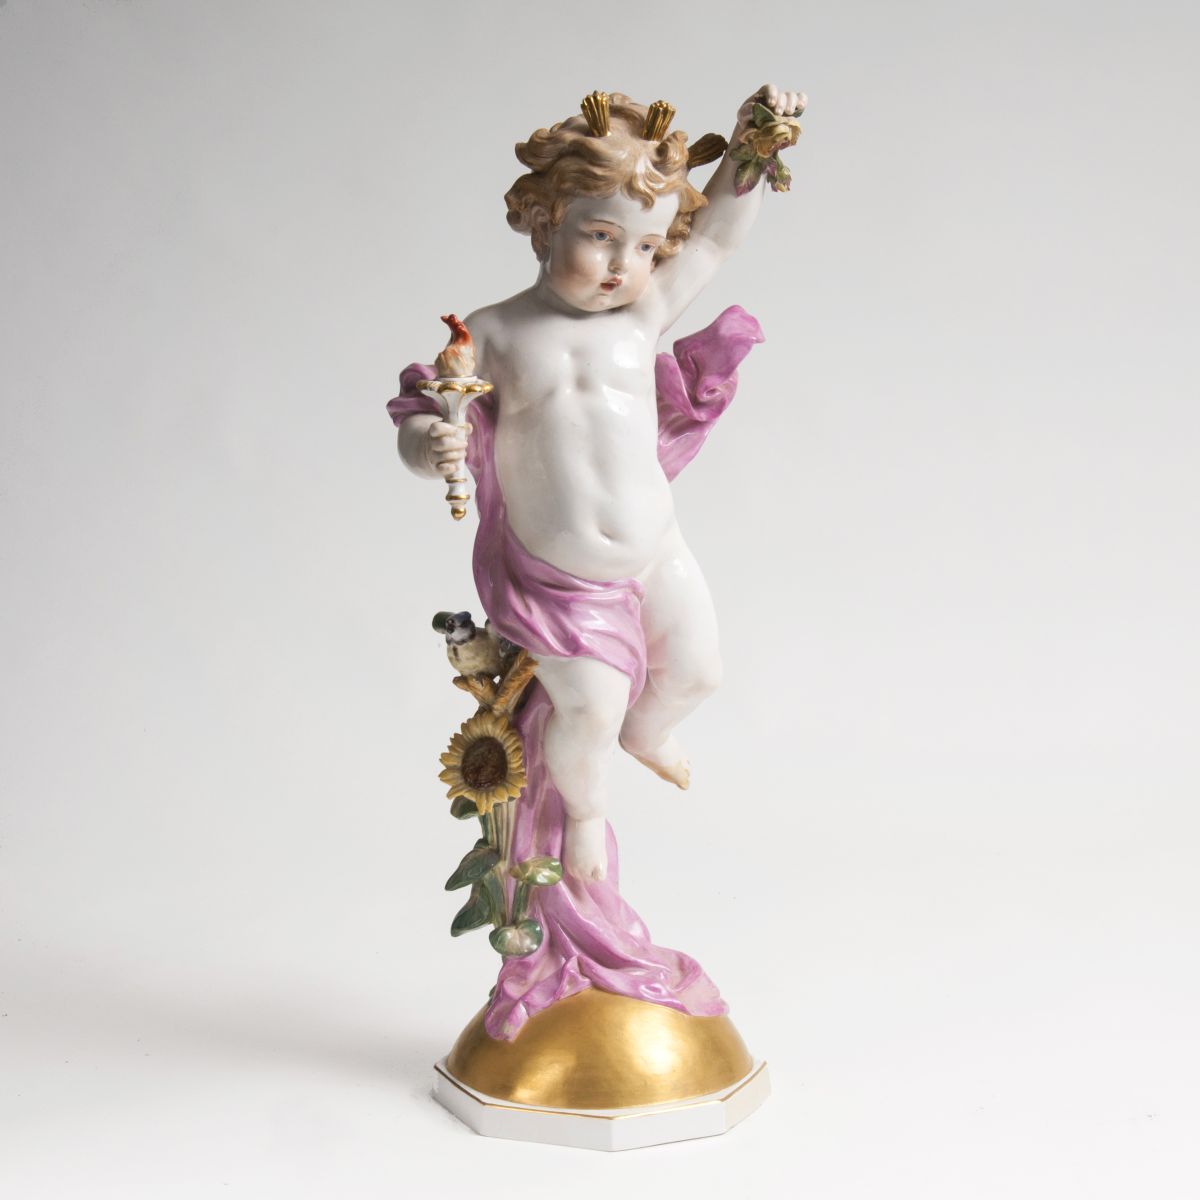 A large Porcelain Figure 'The Day'